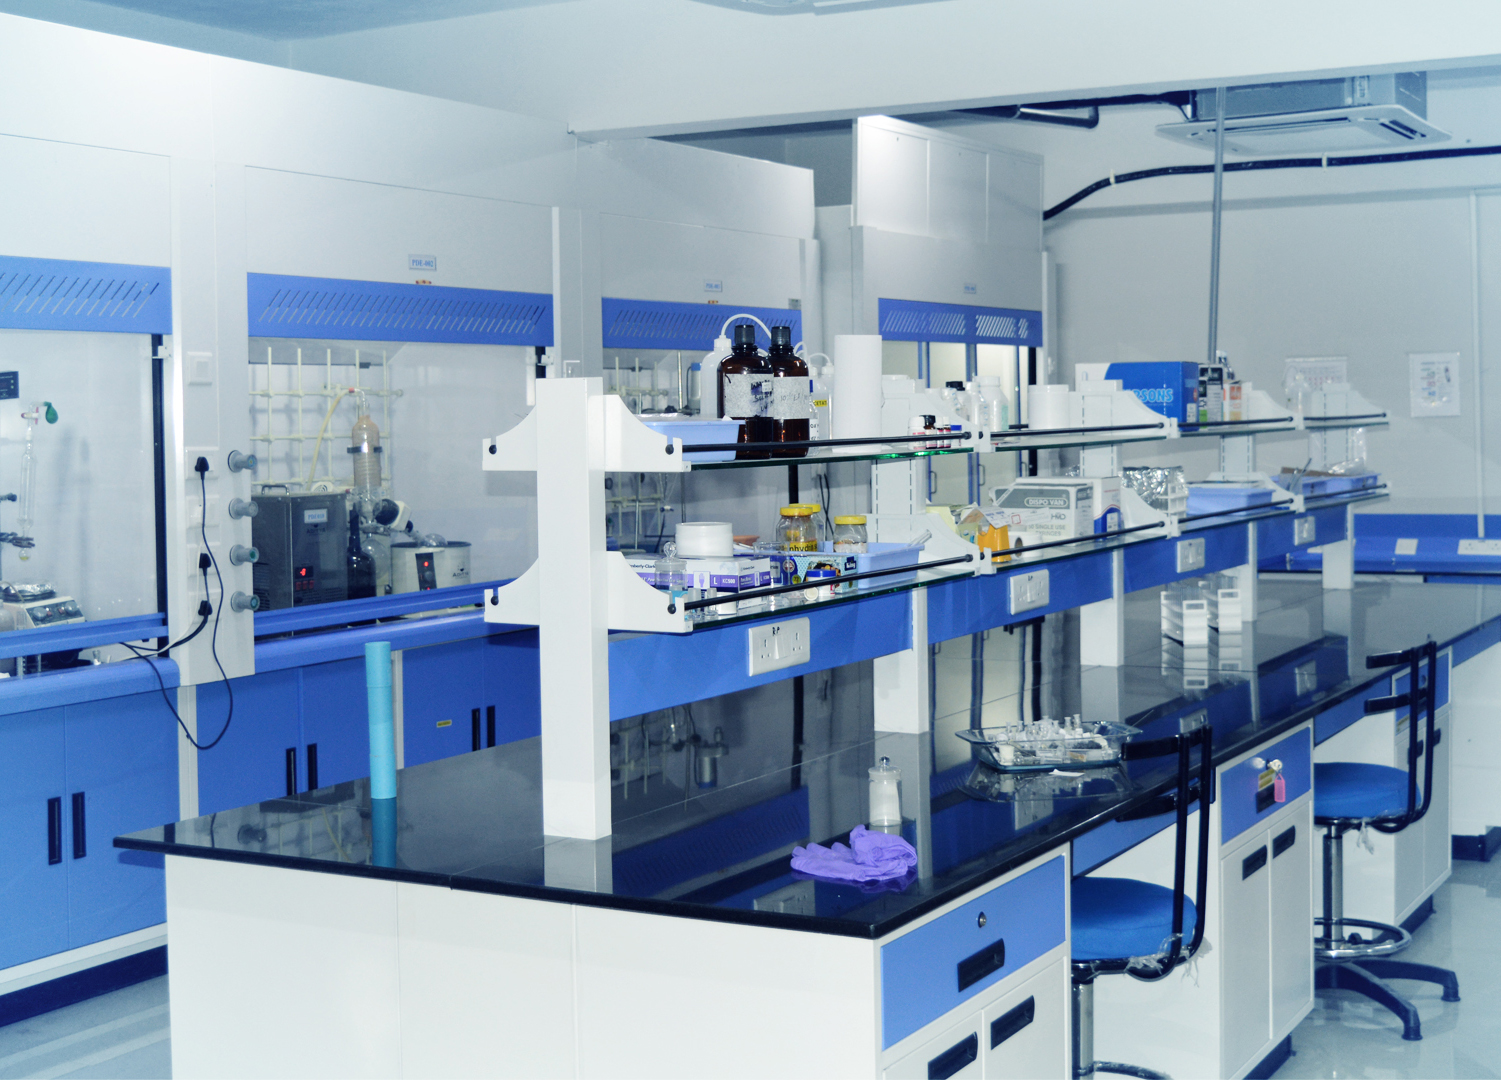 Planning requirements for special laboratories